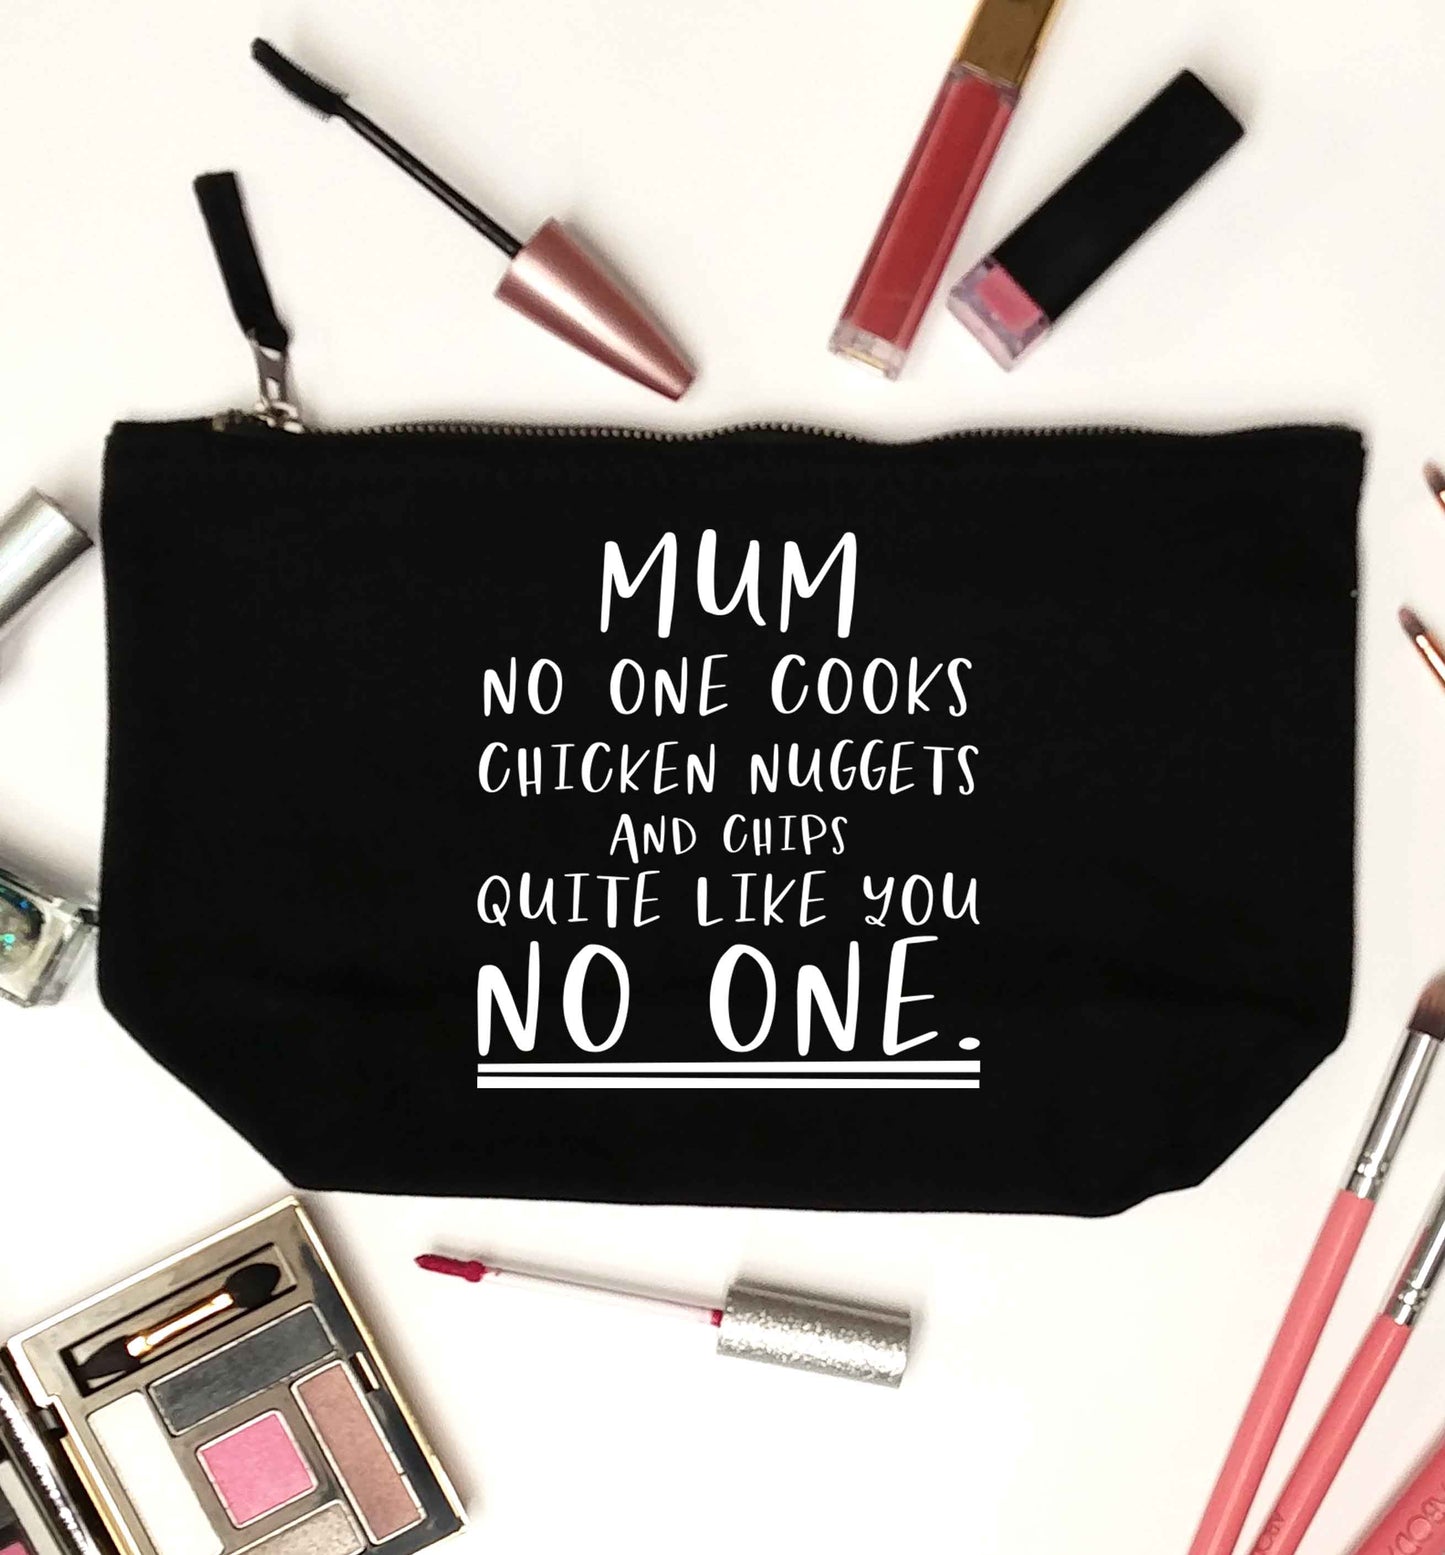 Super funny sassy gift for mother's day or birthday!  Mum no one cooks chicken nuggets and chips like you no one black makeup bag